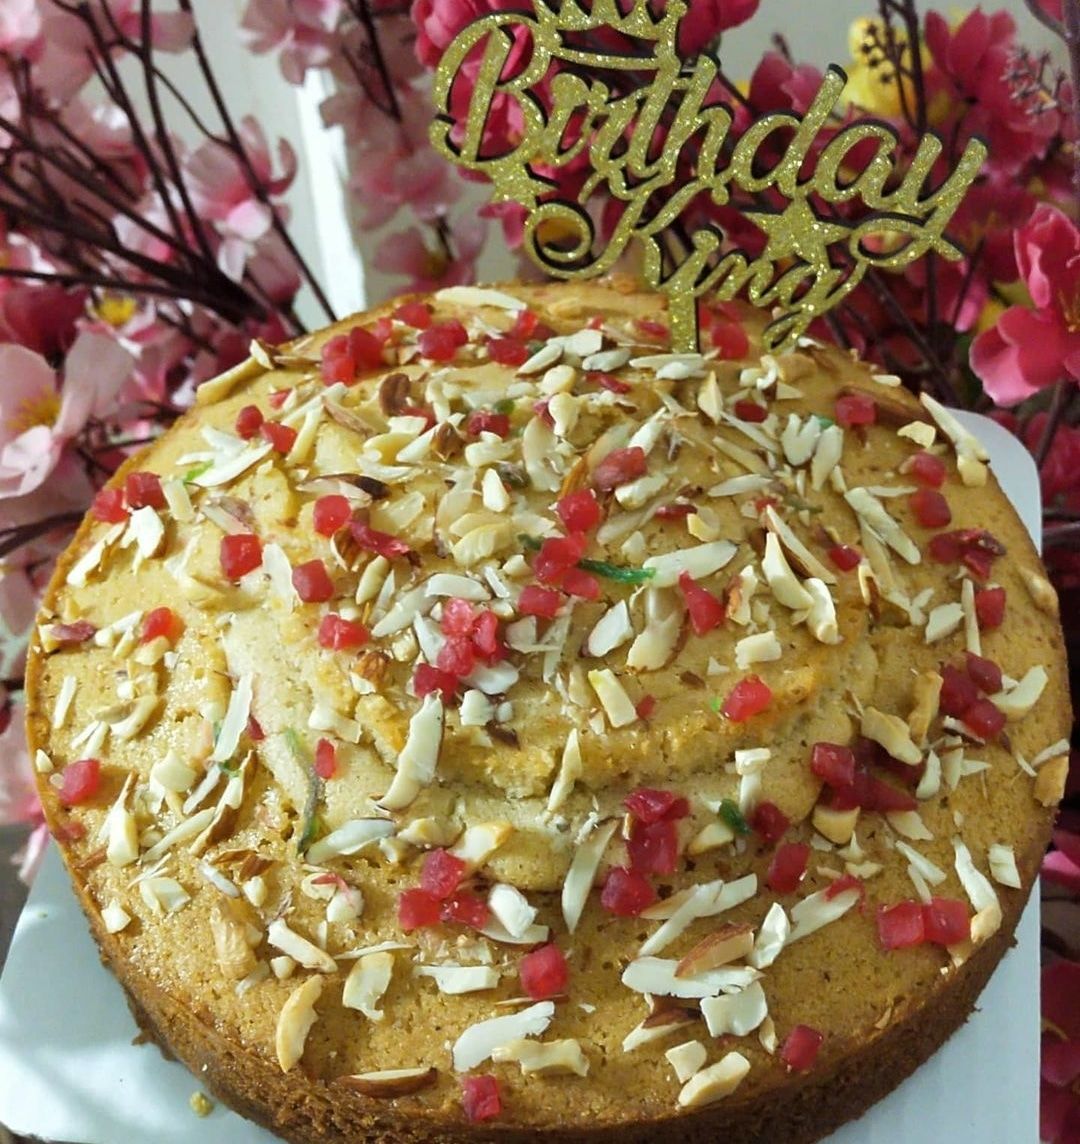 Delightful Dry Cake With Roasted Almonds - Wishingcart.in